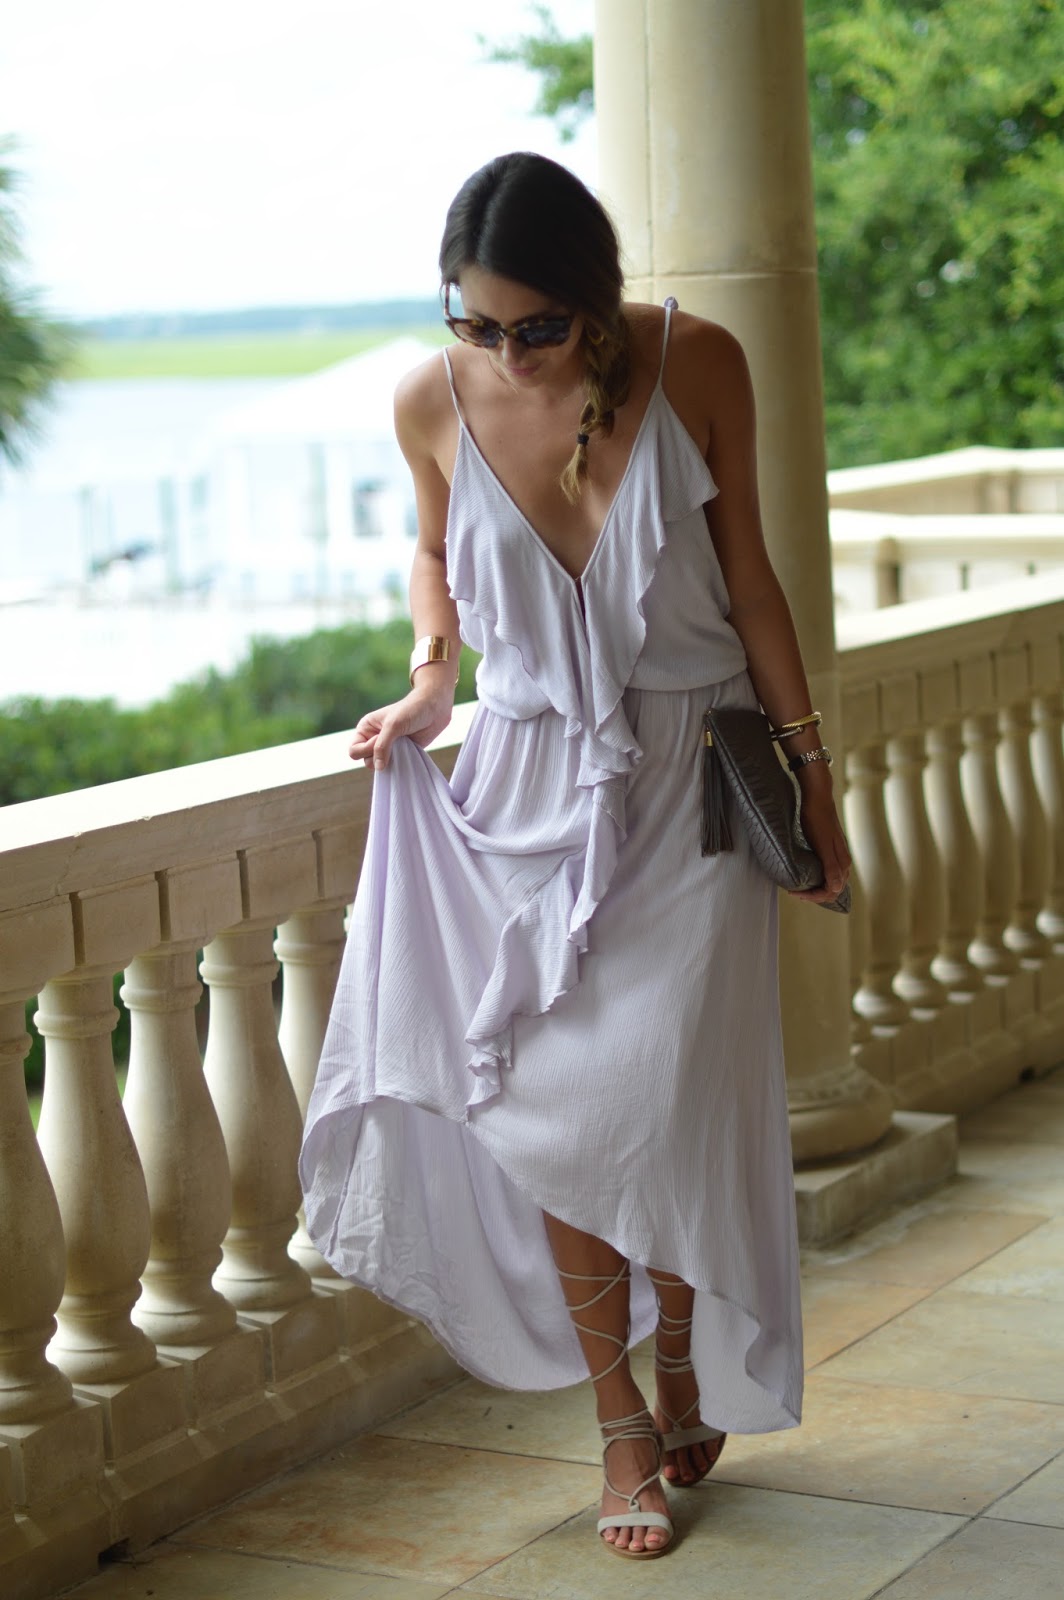 flowy purple dress / Southern Style / lace up sandals